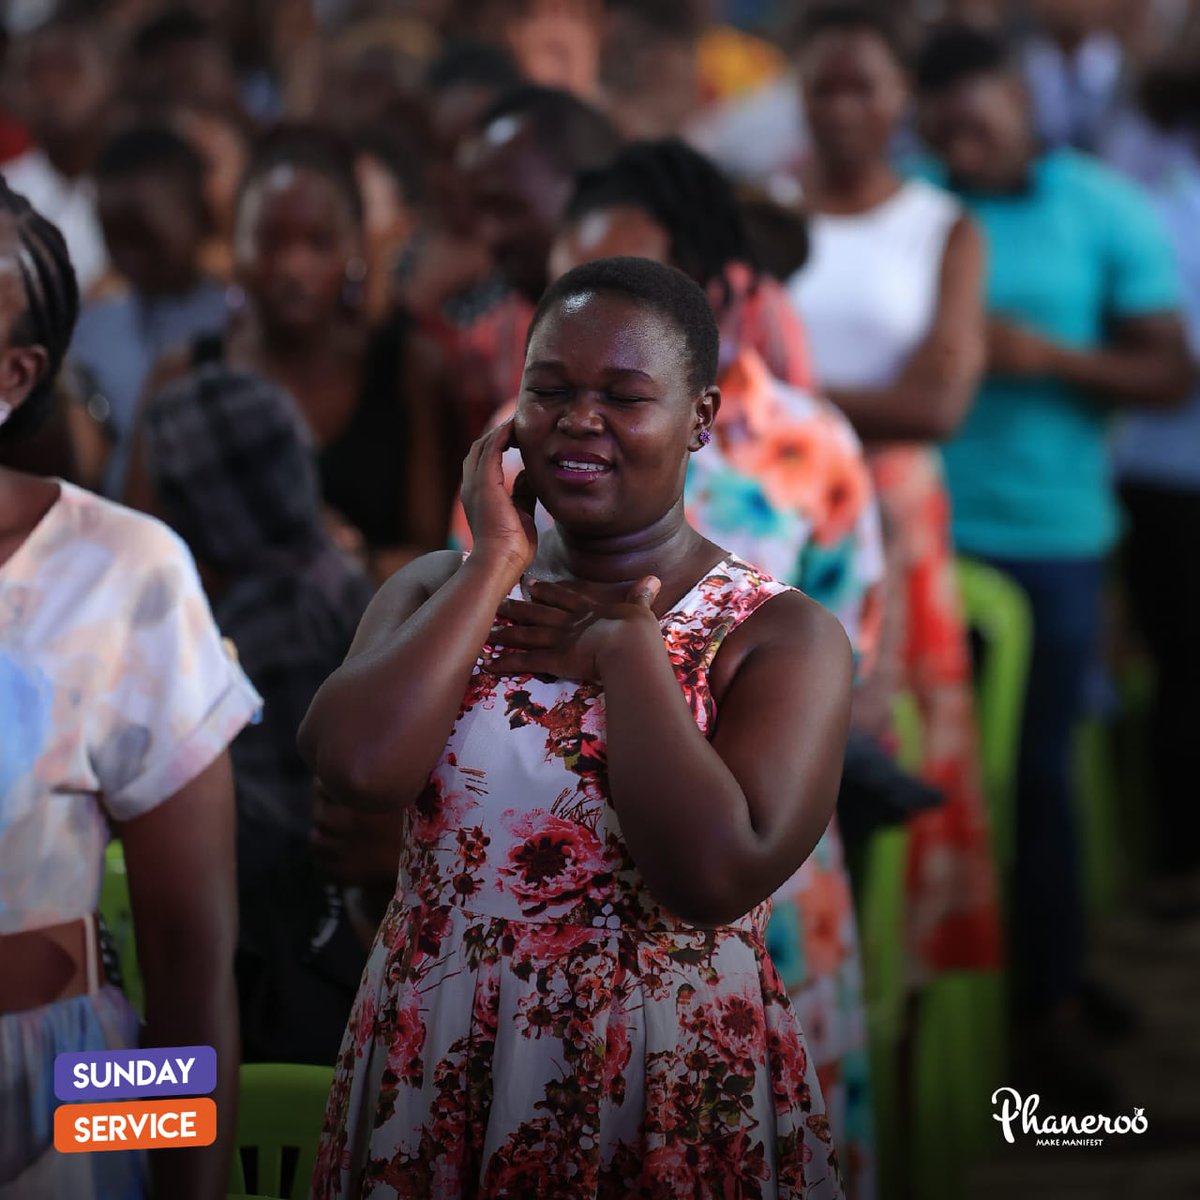 Much as you live a solitude life of prayer. God has called you not to abandon the place of fellowship. God speaks through Men #PhanerooSundayService